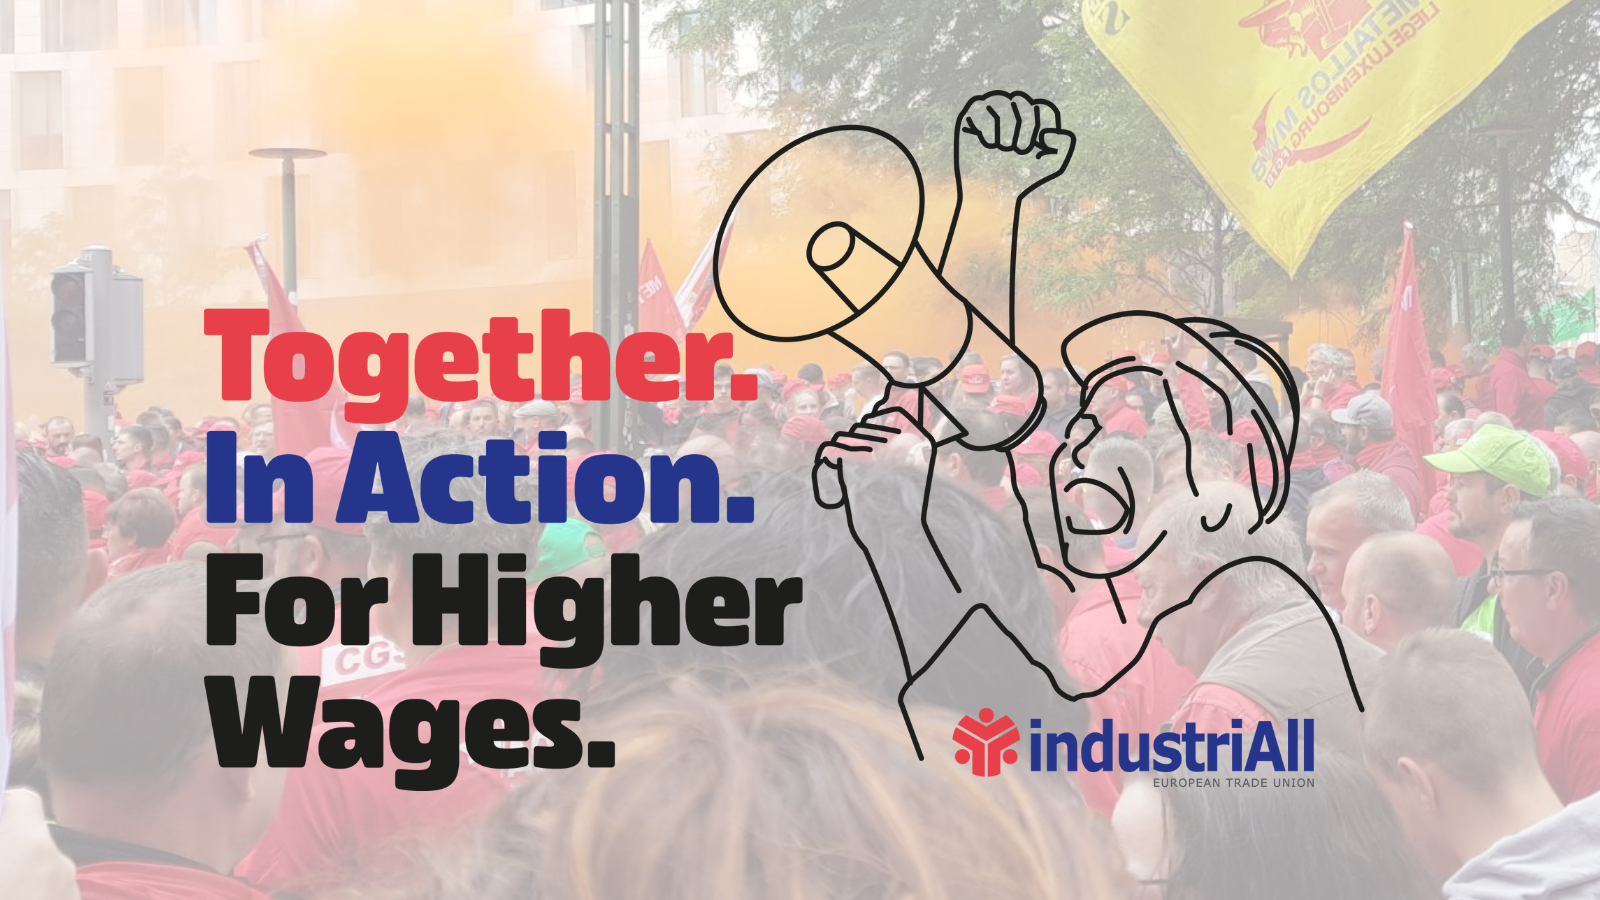 Across Europe industrial unions have one message: we need a pay rise to save the economy!